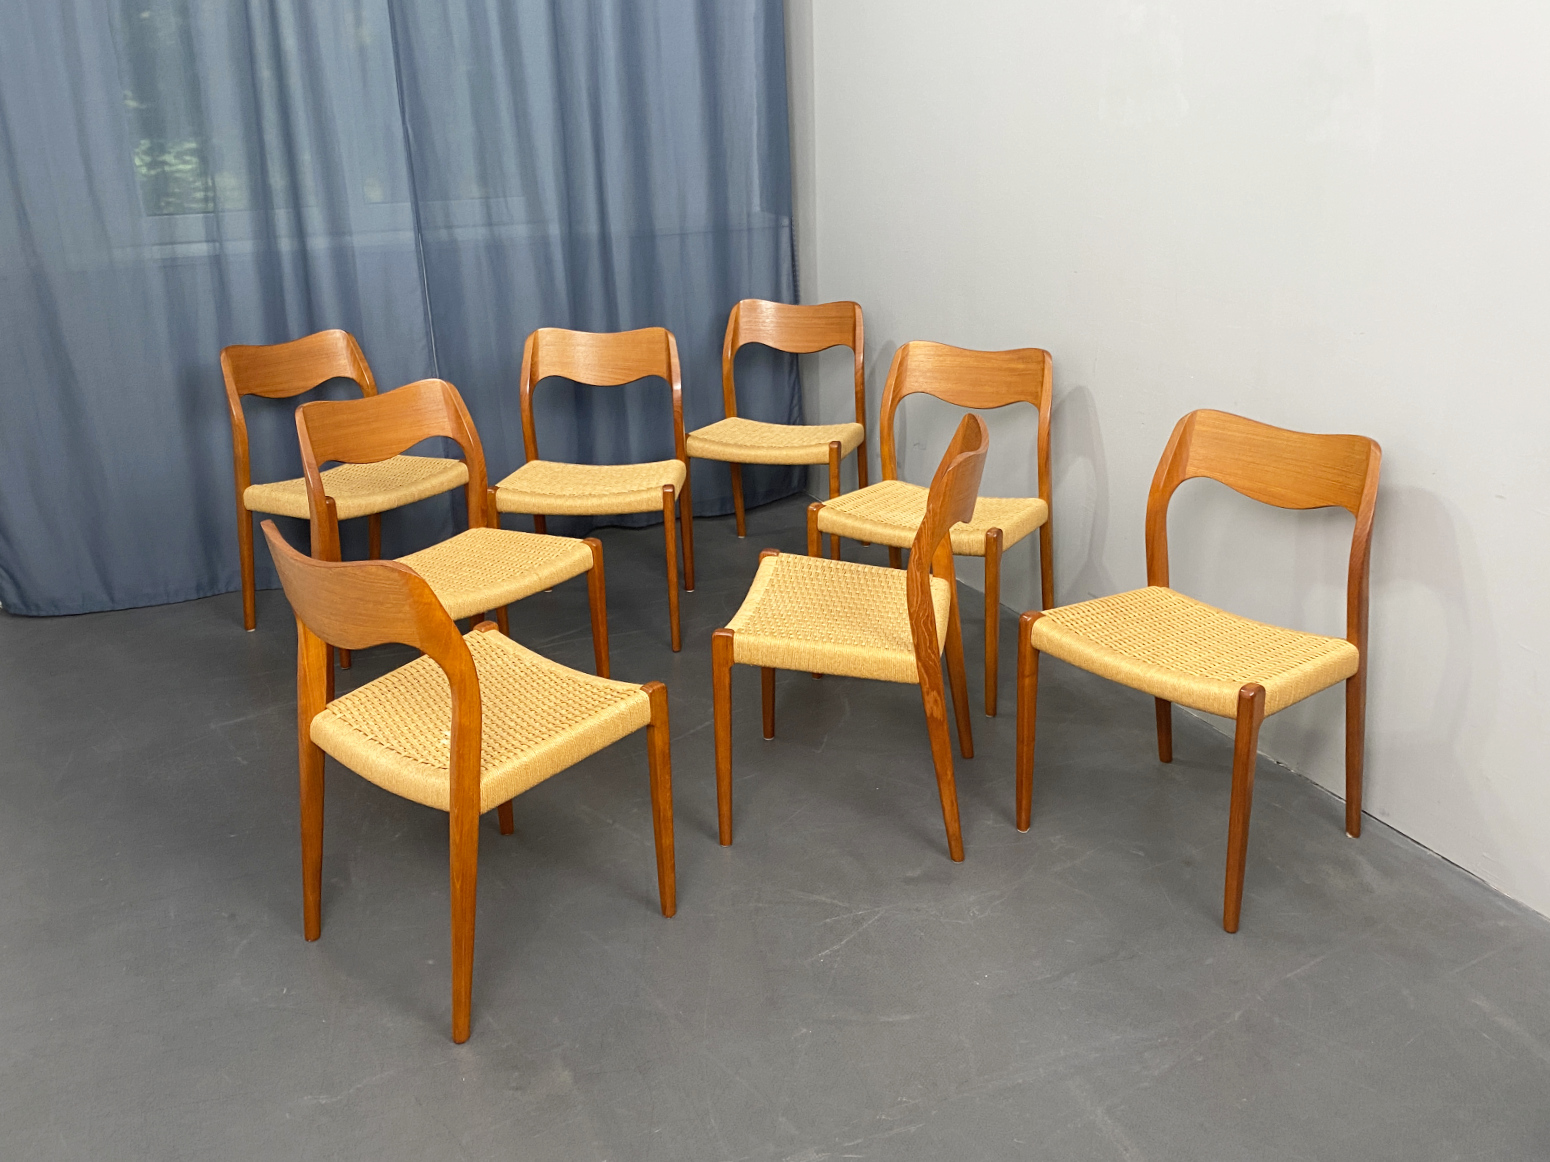 Set of 8 Dining Chairs, Model 71, Teak, Niels O. Moller for JL Mollers, Denmark, 1950s